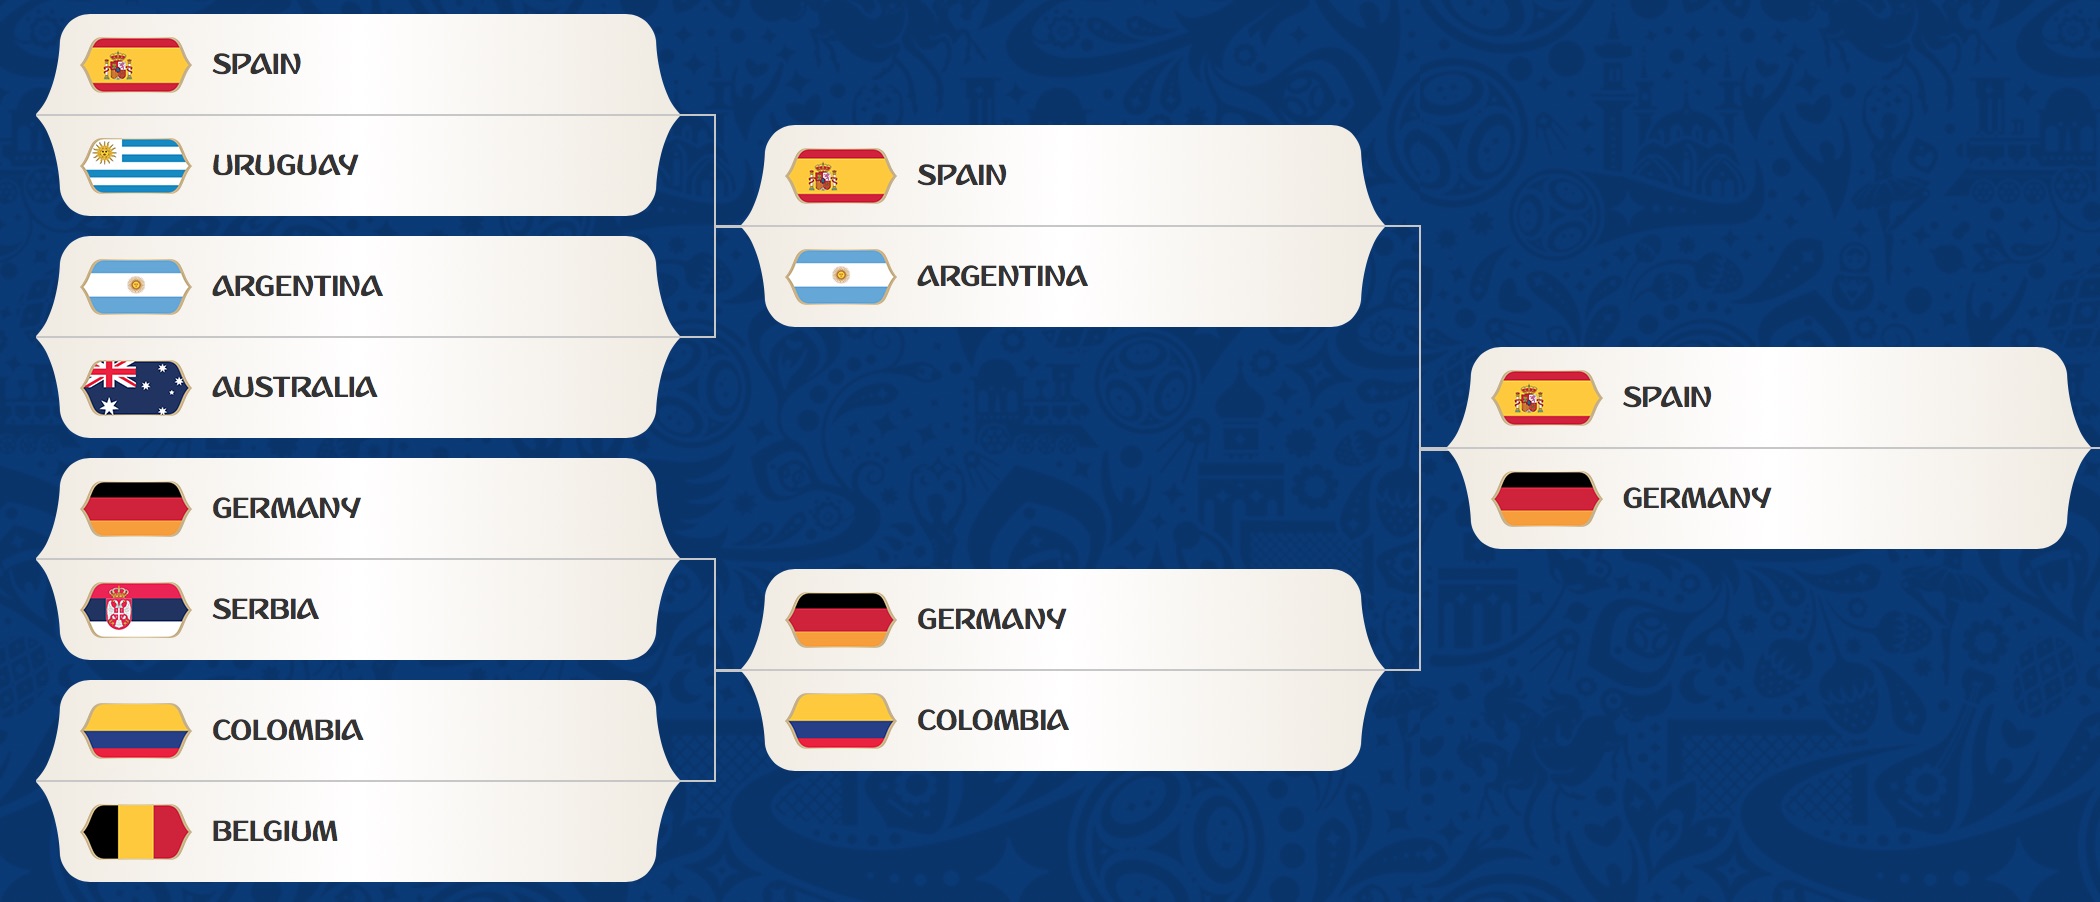 FIFA World Cup 2018 (Russia): Knockout Stages (Bottom Half)